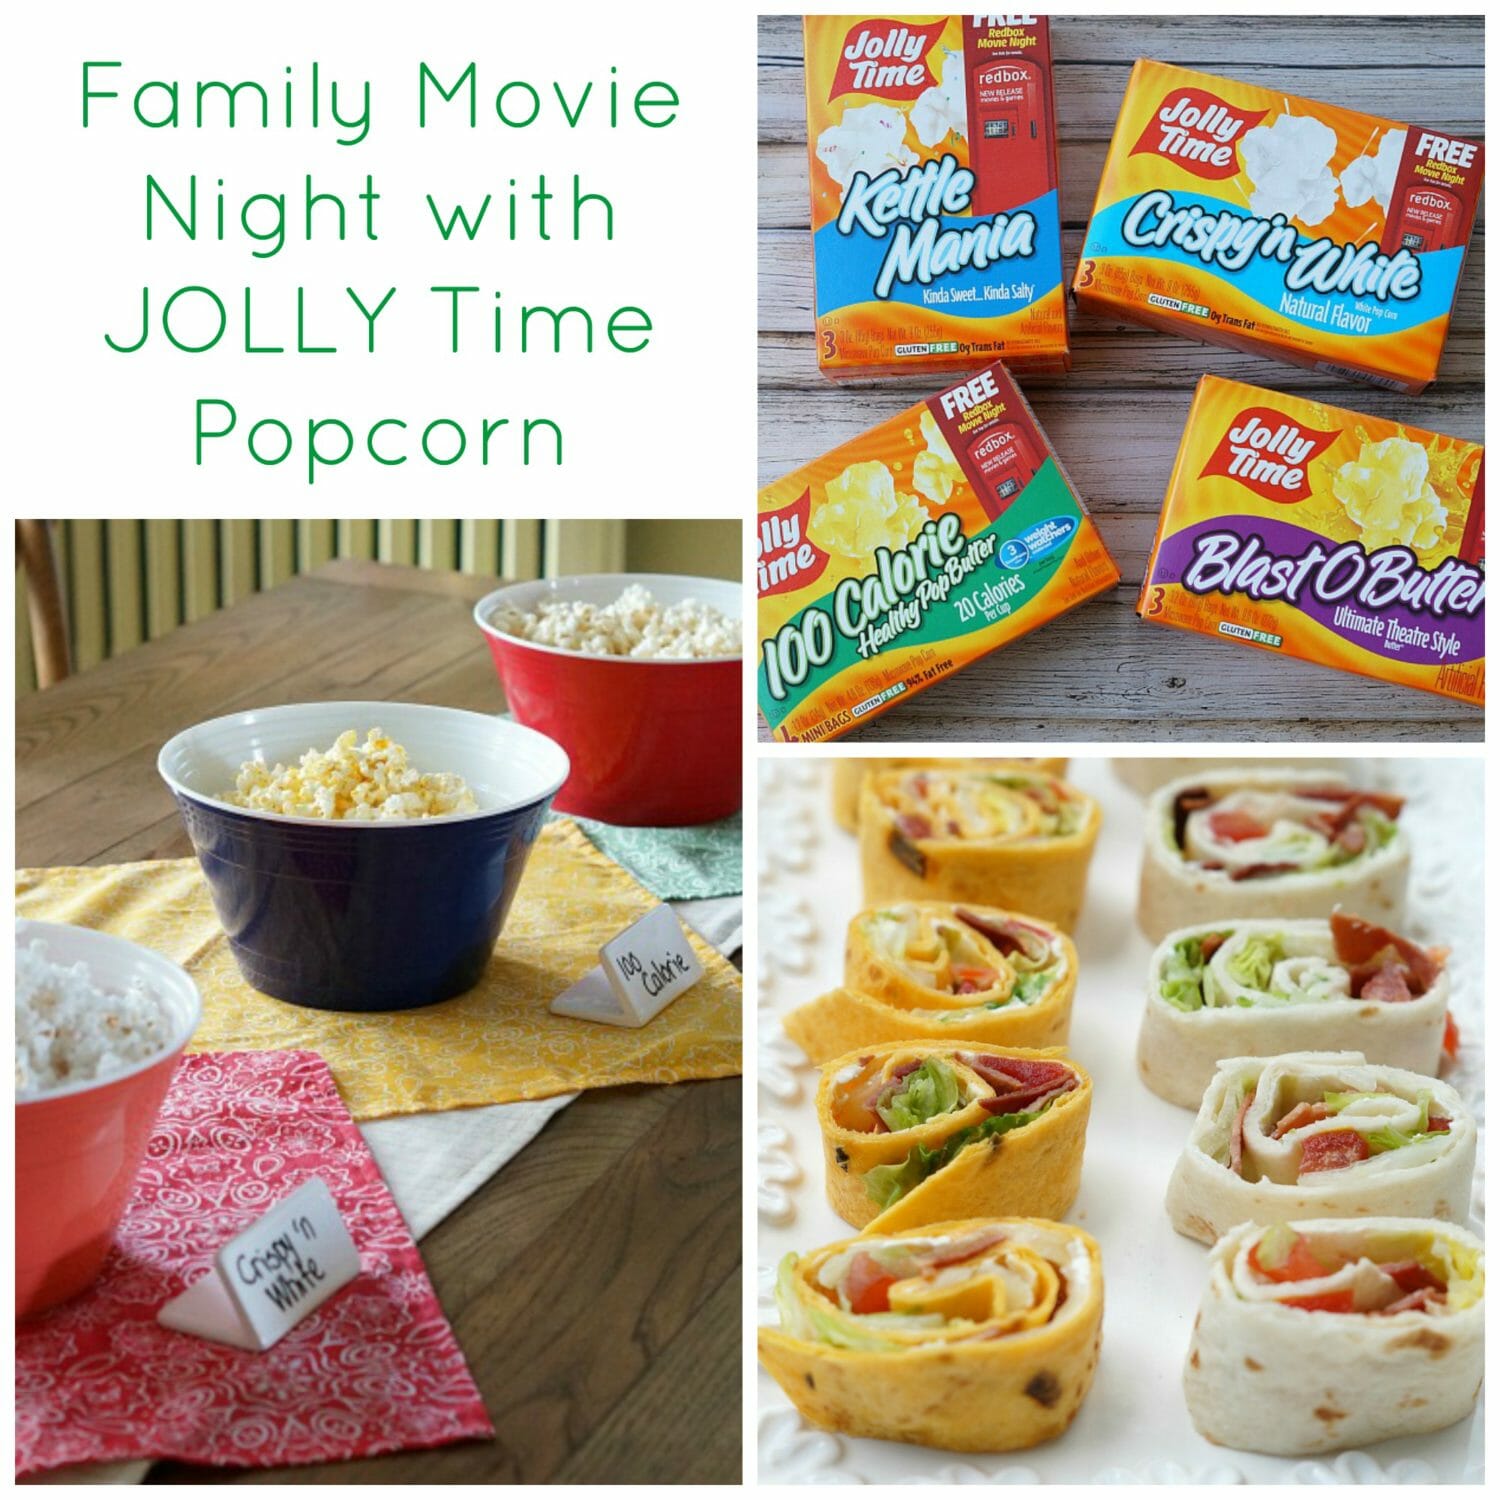 Family Movie Night with JOLLY Time Popcorn